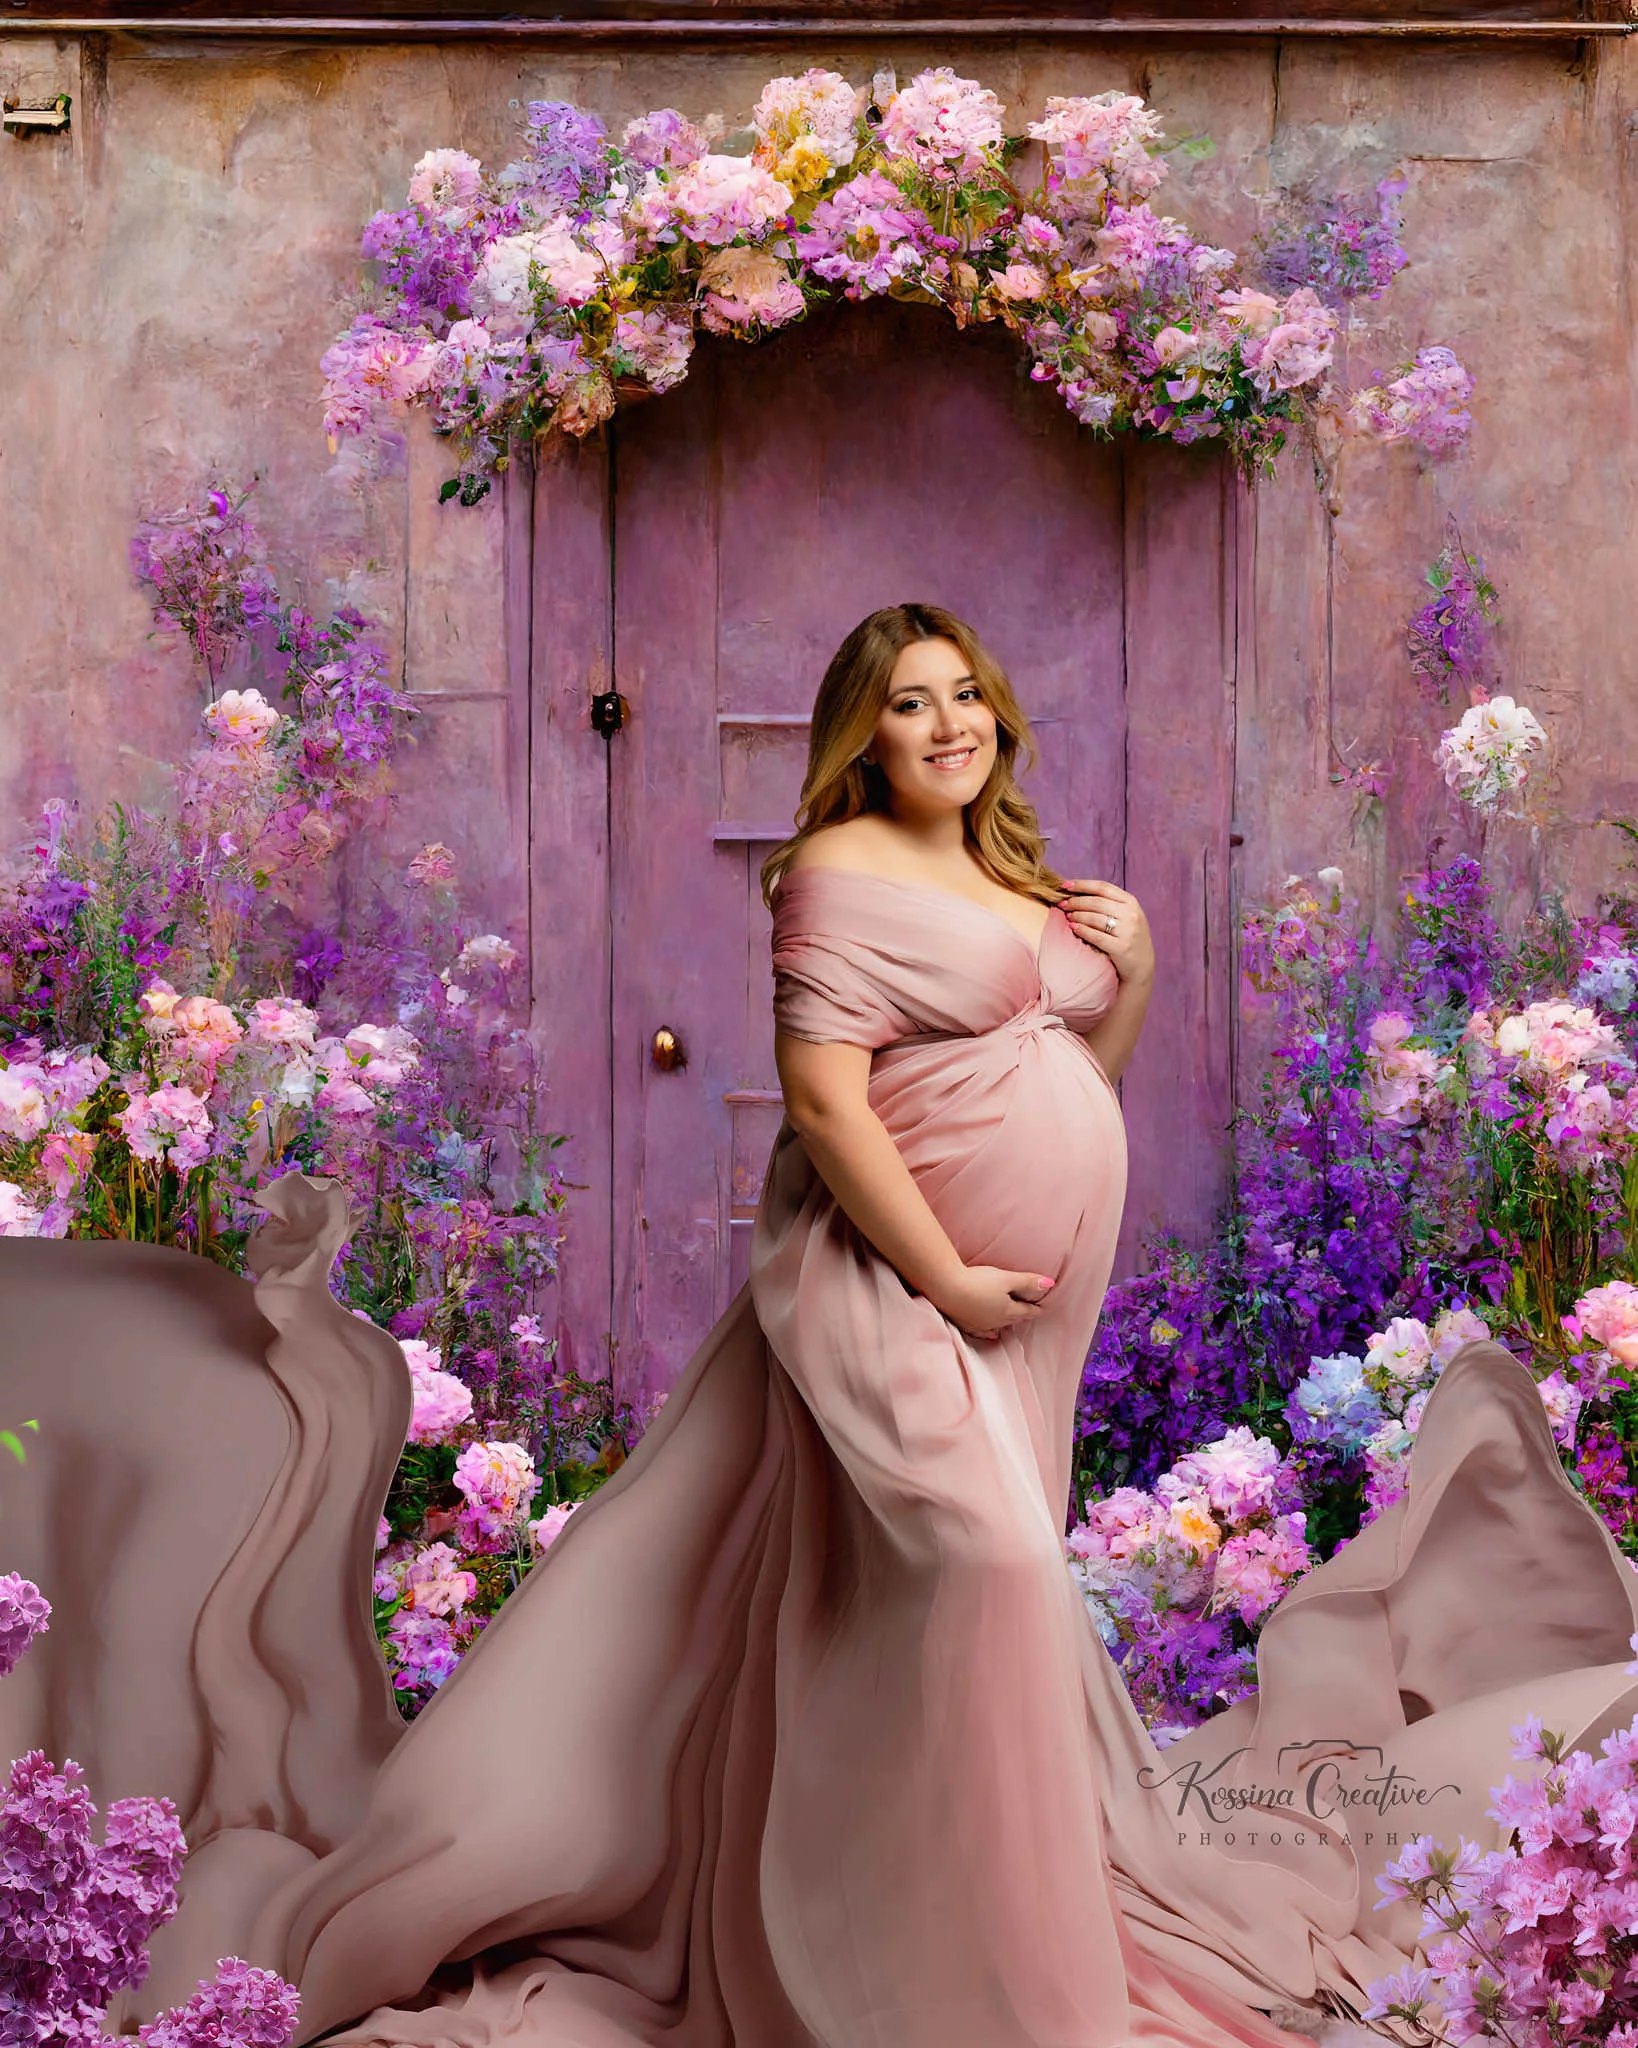 Orlando Maternity Photographer Photo Studio flowers pink fabric with floral background